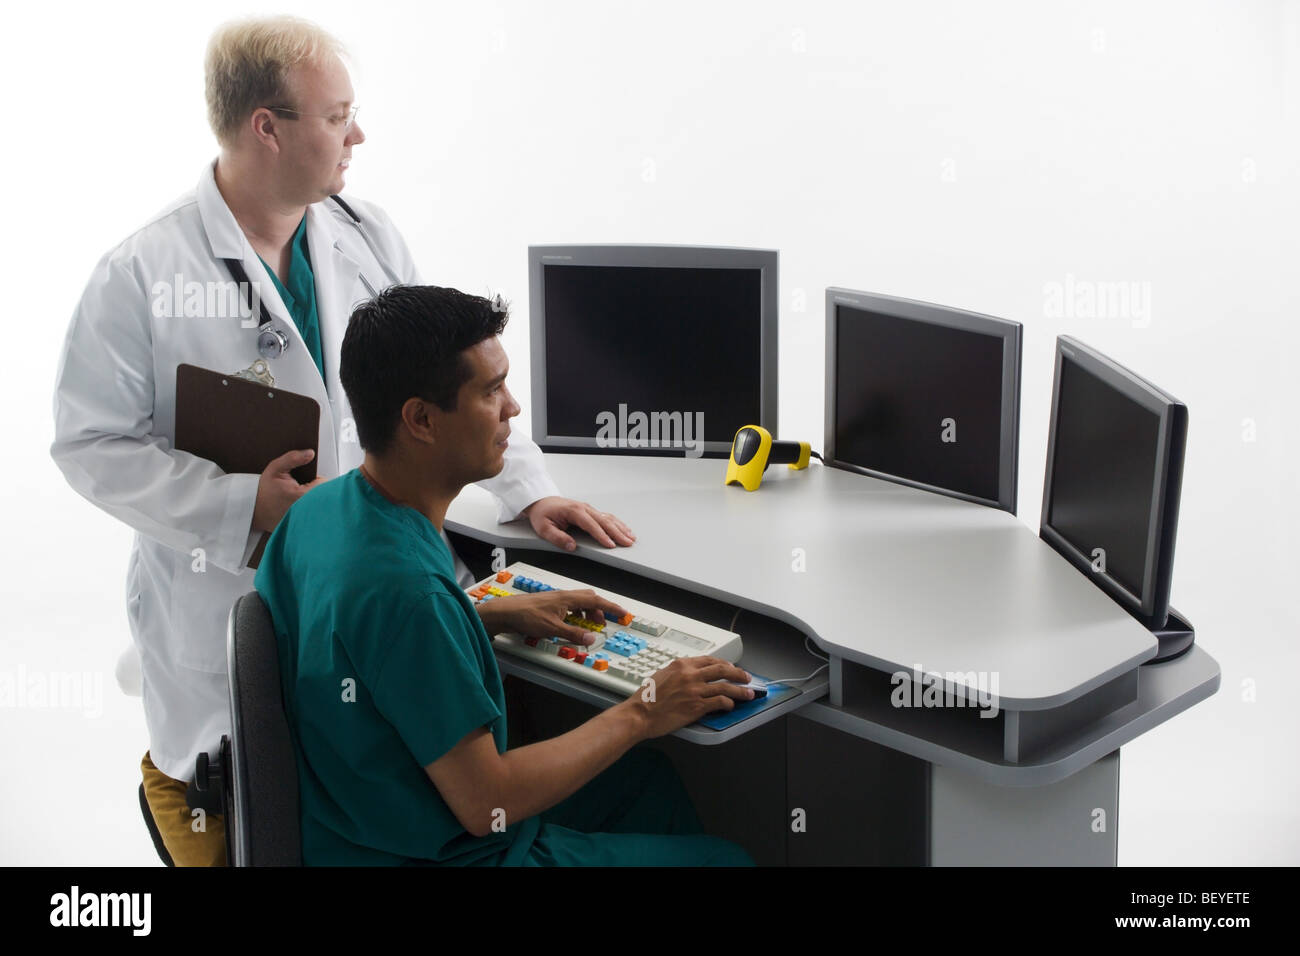 Computer Technicians in Lab Coats, Doctor with computer display, medical records Stock Photo